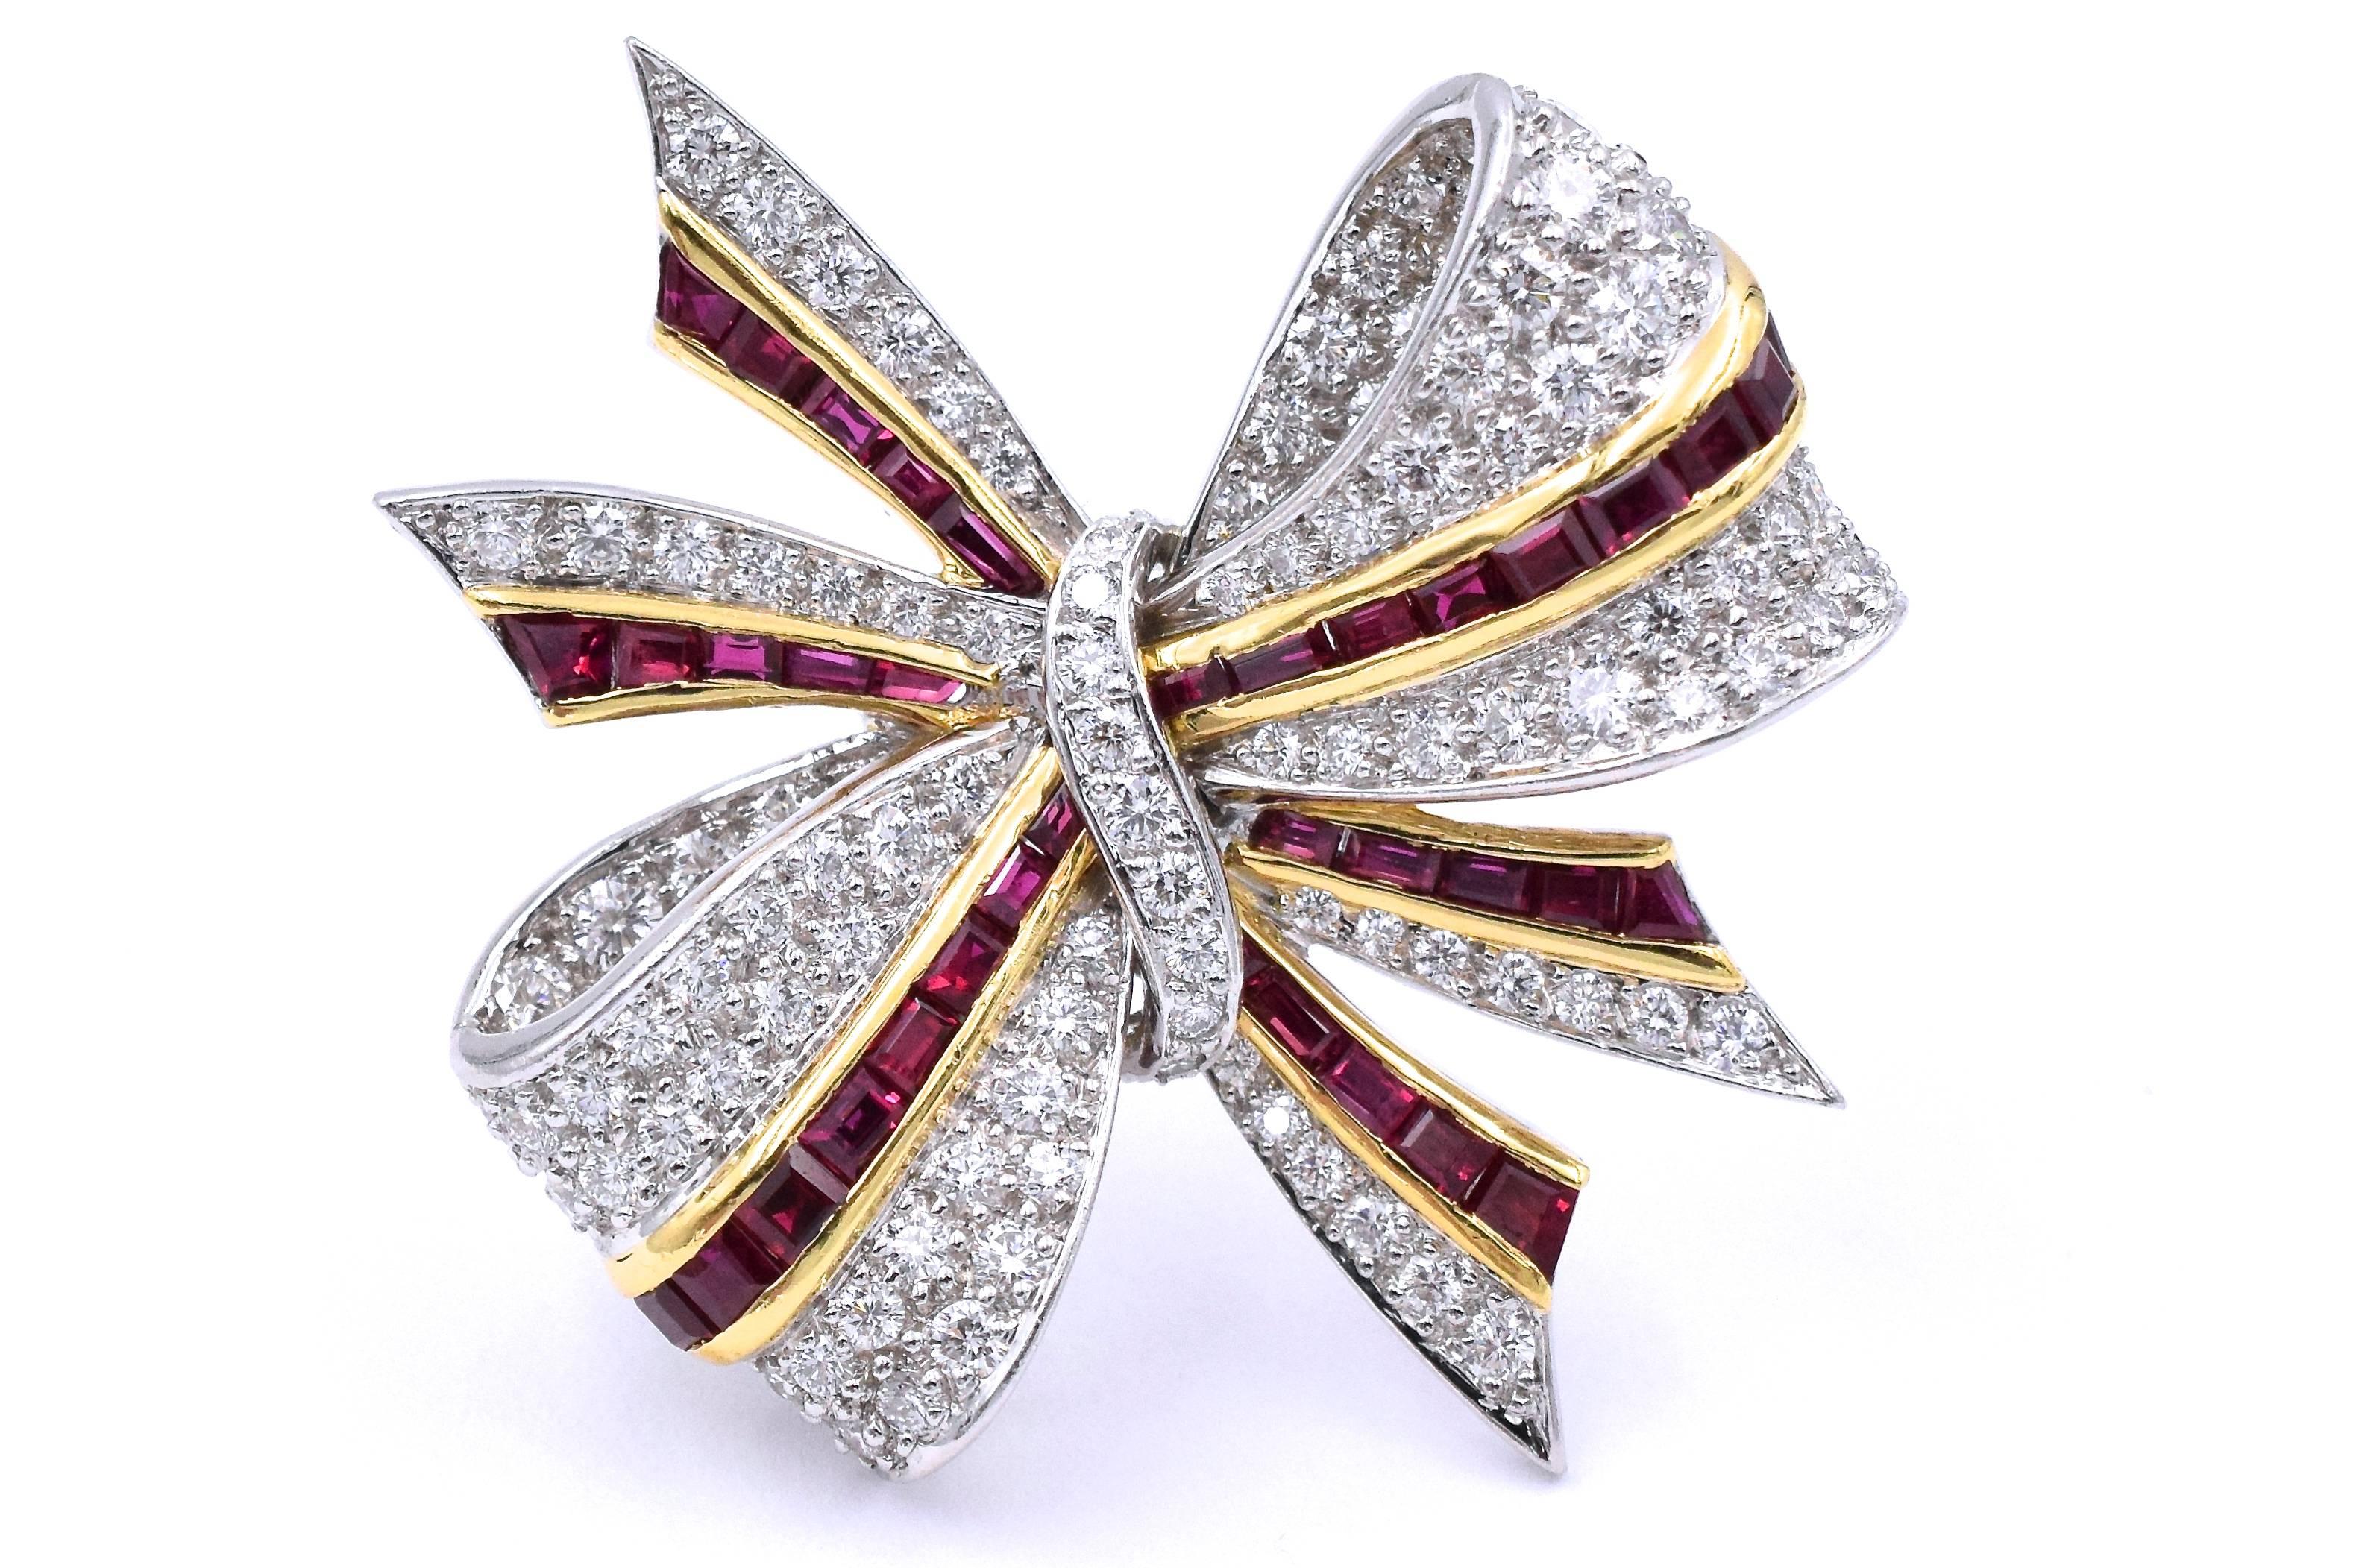 Tiffany & Co diamond and  ruby and diamond bow brooch!
38 square faceted rubies set in 18k yellow gold, weighing 1.45 carats
116 brilliant diamonds set in platinum, weighing 1.37carats
Signed: Tiffany and Co